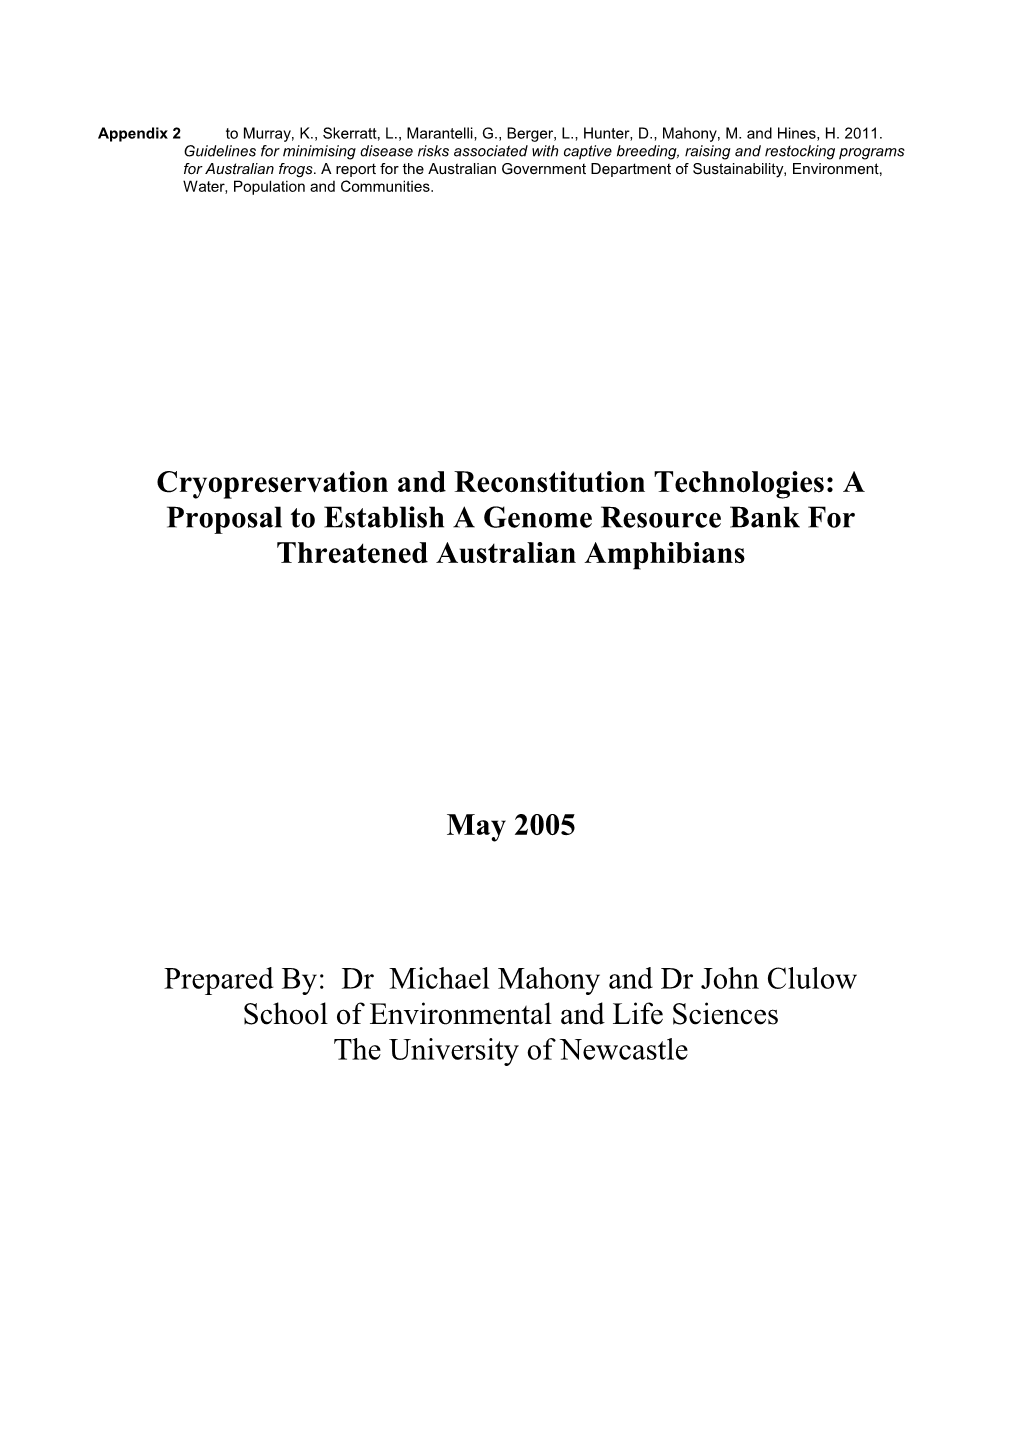 Appendix 2: Cryopreservation and Reconstitution Technologies: a Proposal to Establish A